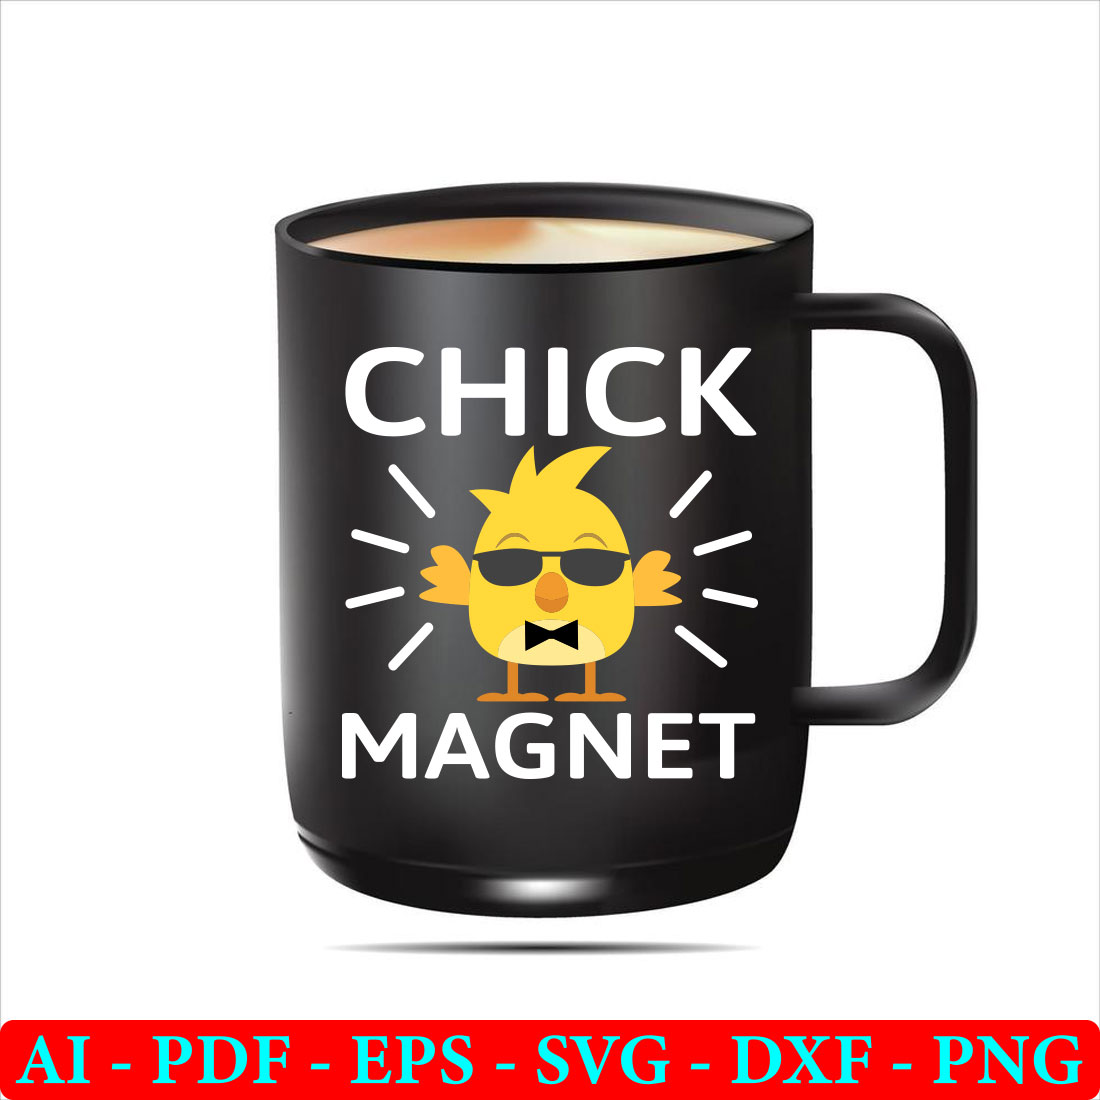 Black coffee mug with a chick magnet on it.